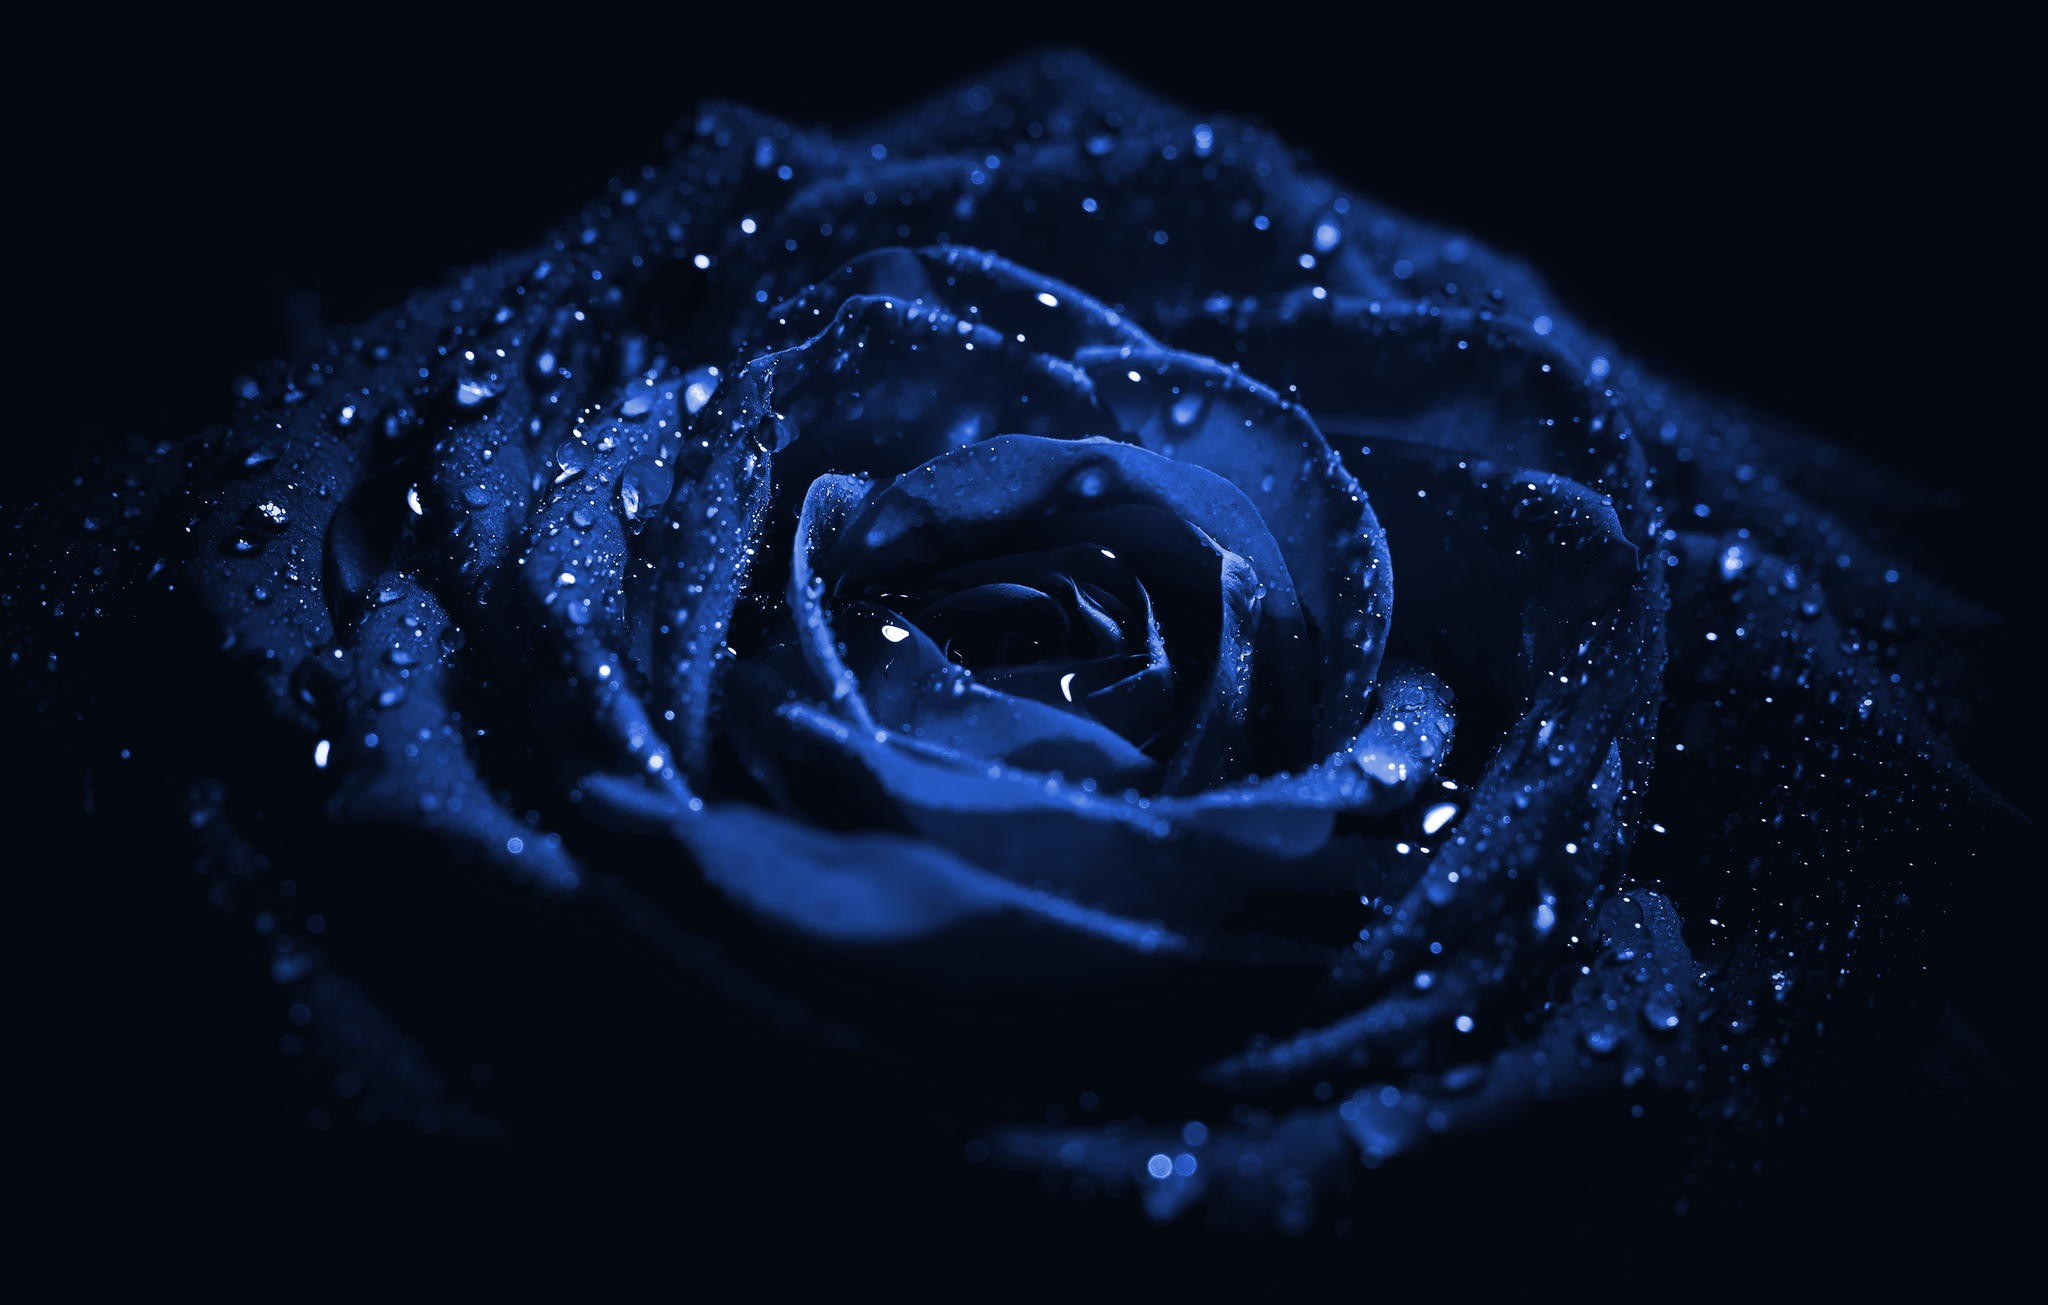 Flowers: Blue Rose Flower Dark Hd Wallpaper For Android for HD 16:9 ...